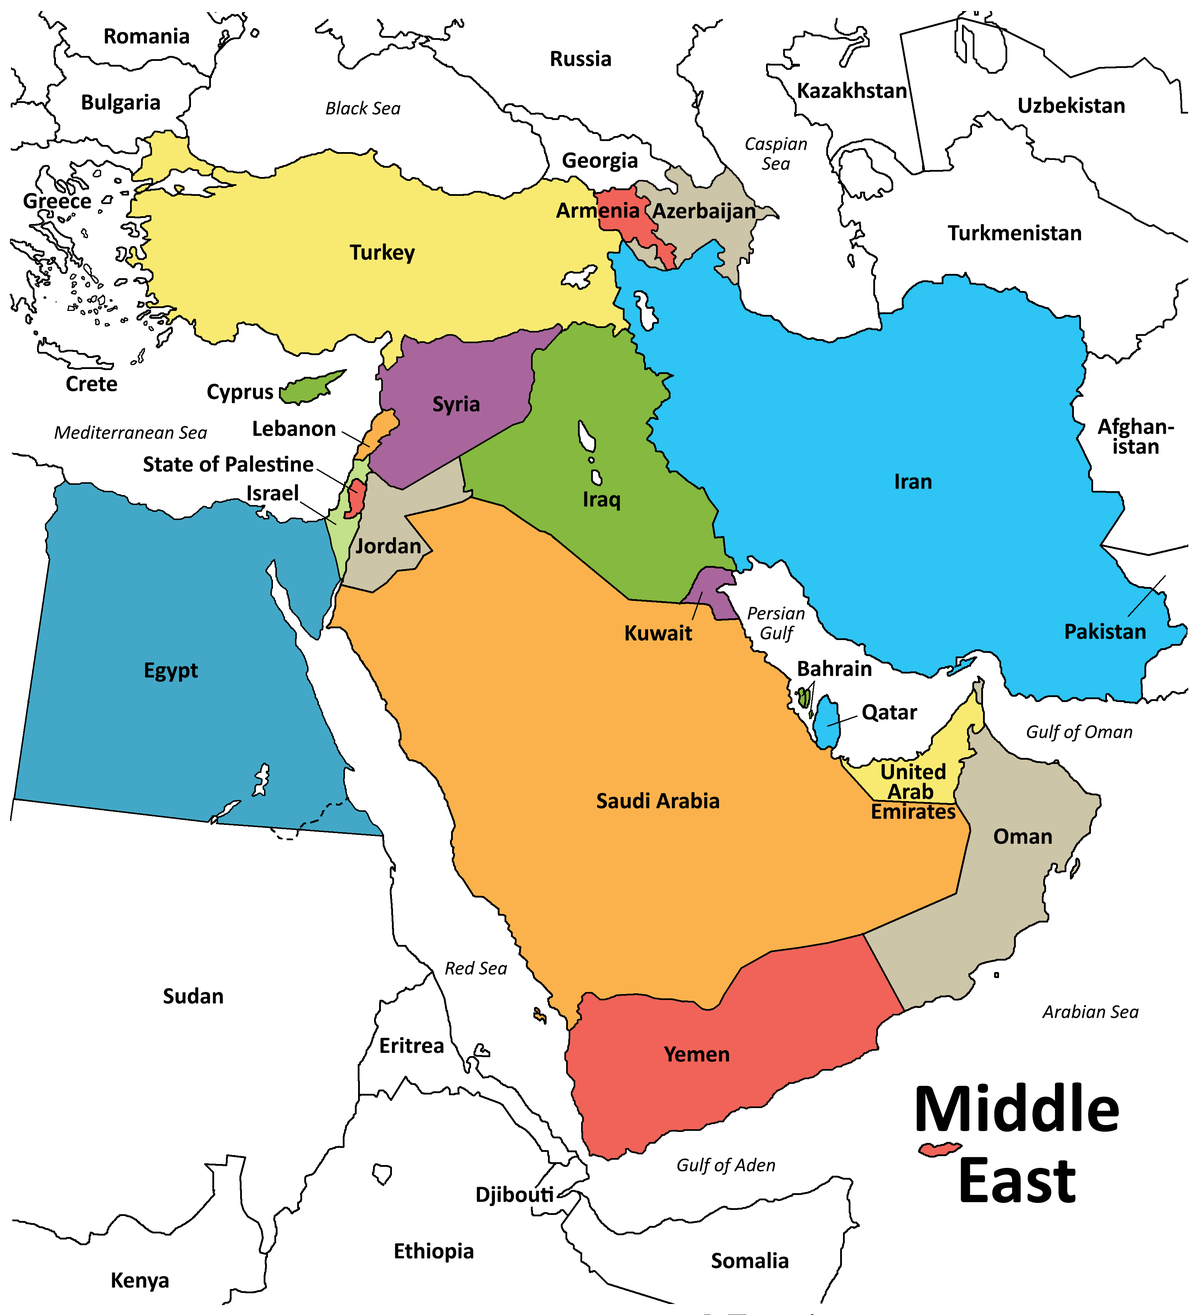 Middle East situation by SABRE (1.0) ALL PLANES 